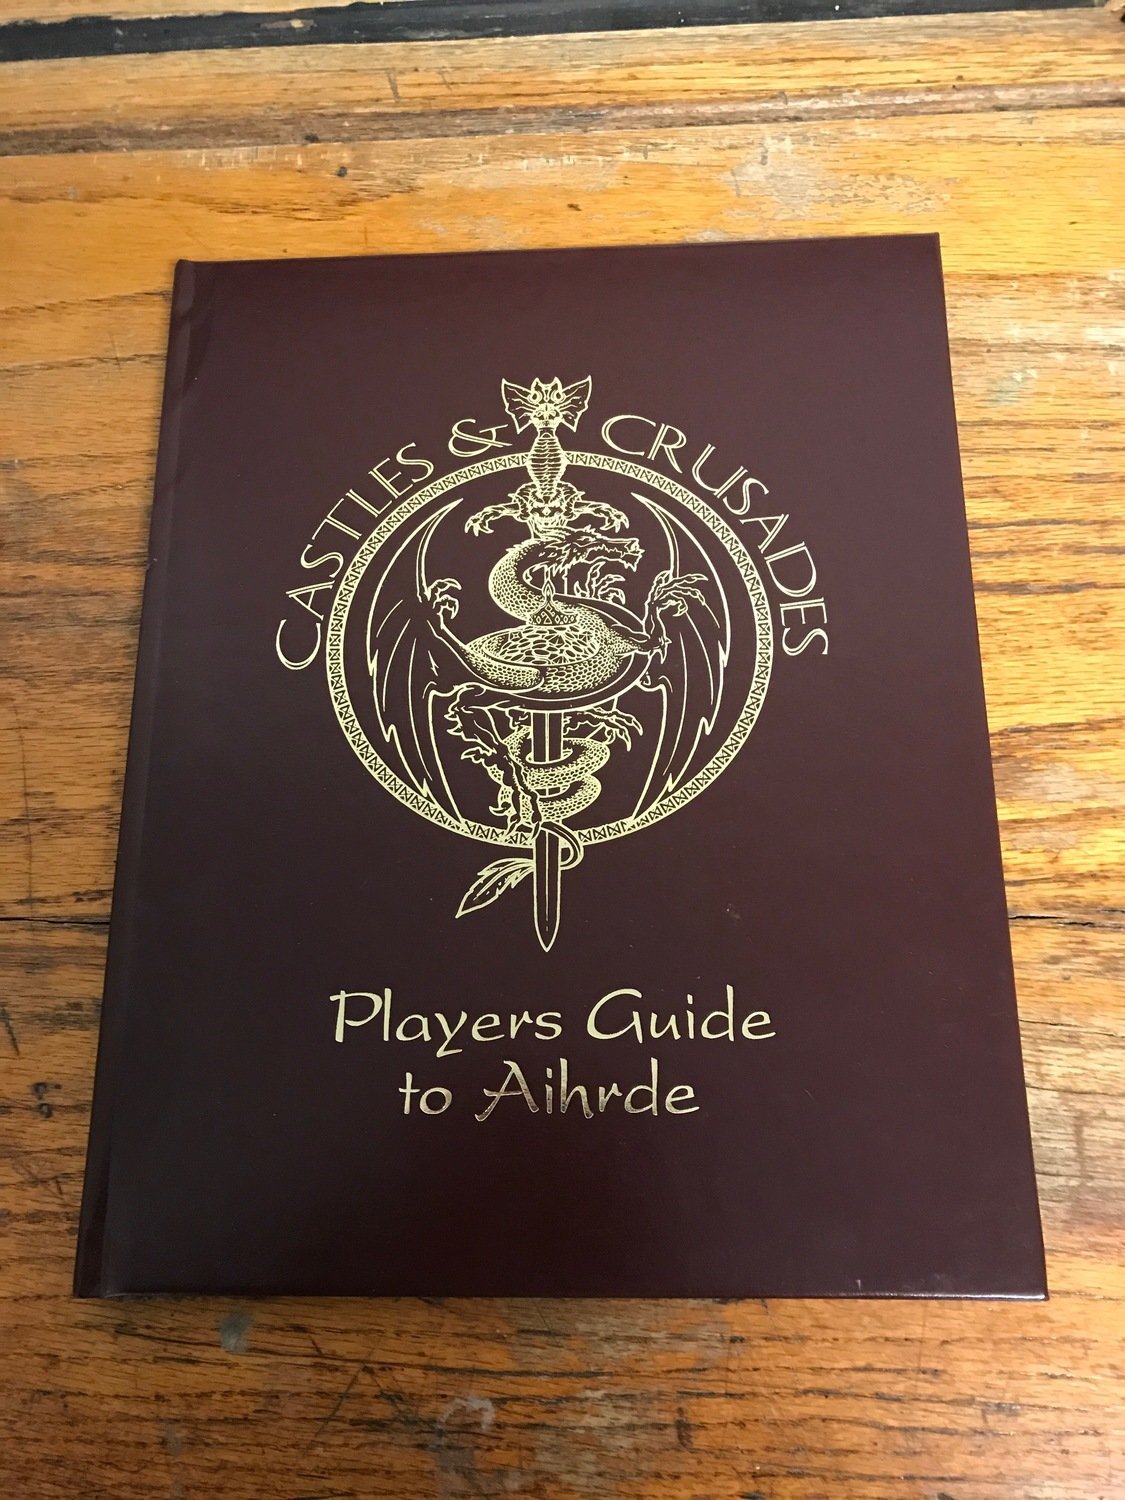 Castles & Crusades Players Guide to Aihrde -- Leather Edition